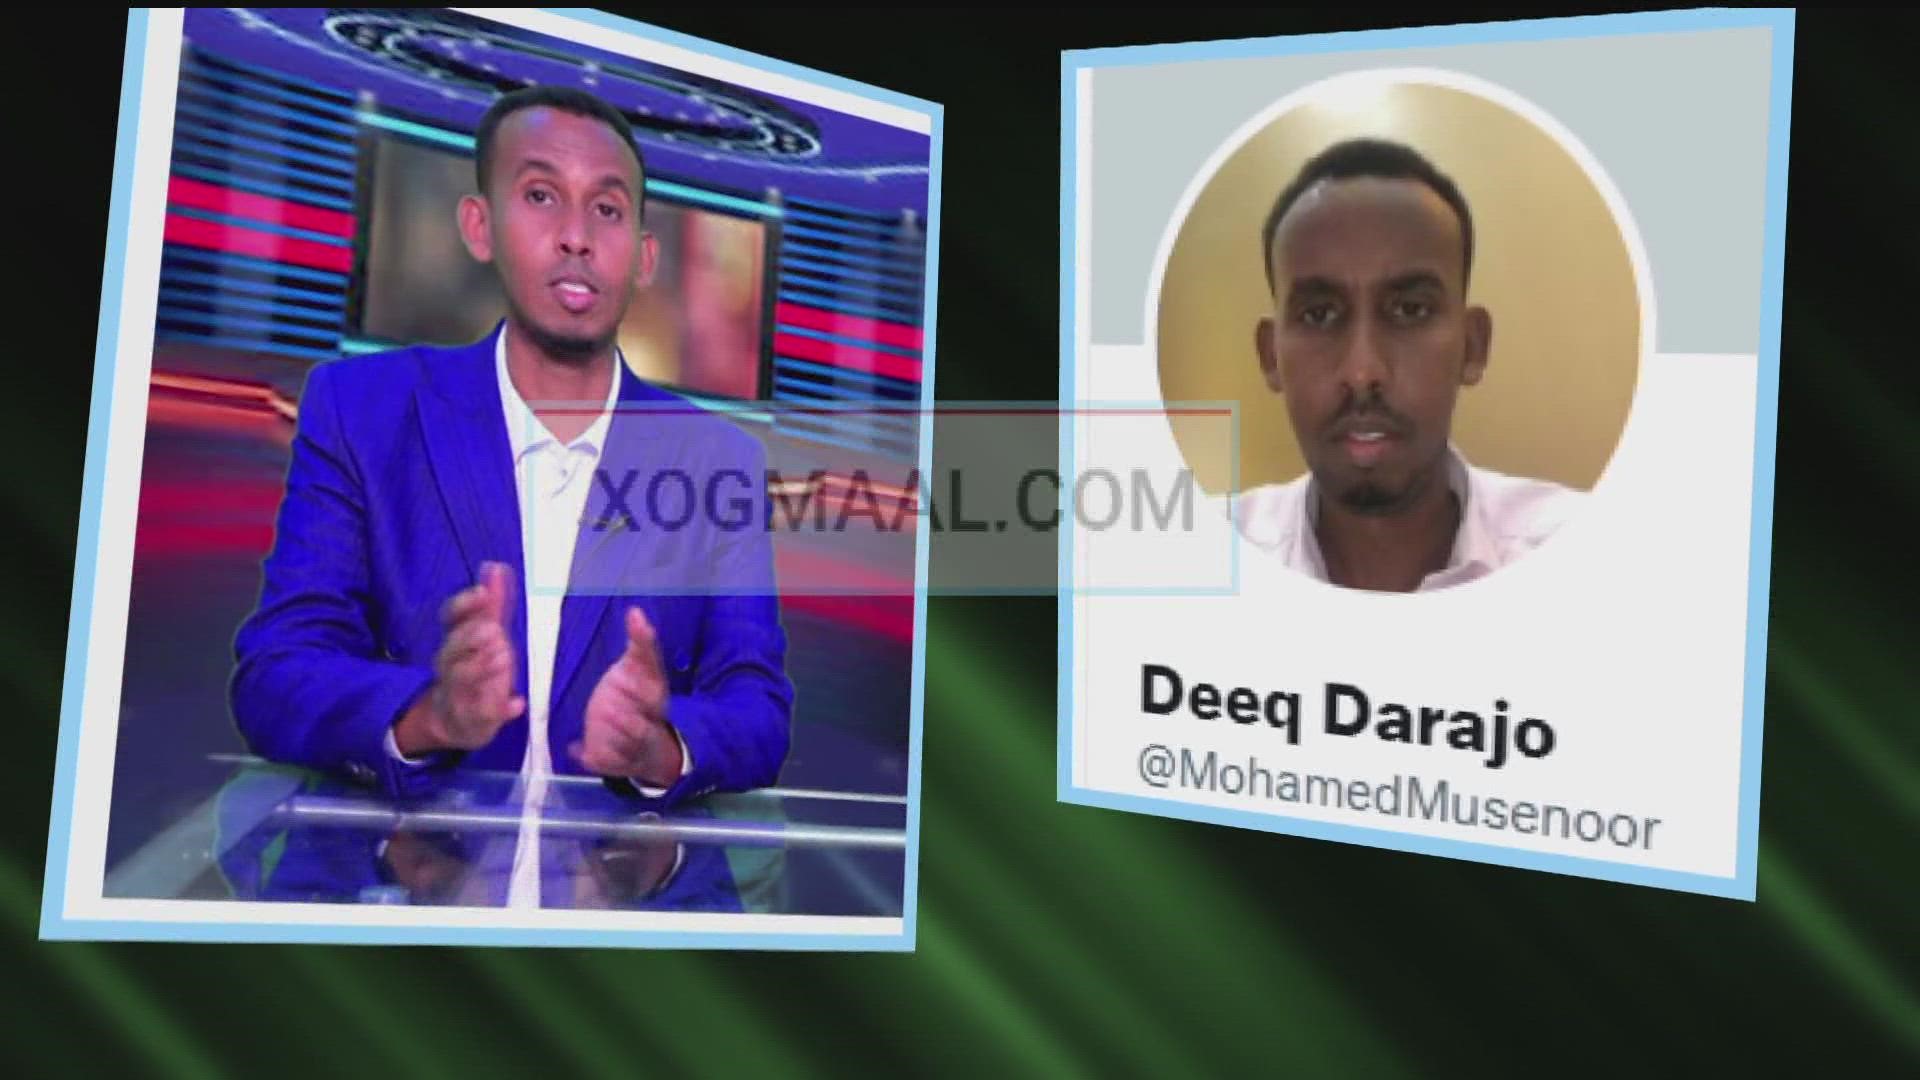 Mohamed Muse Noor, aka Deeq Darajo is accused of paying his mortgage, buying cryptocurrency and jewelry with money obtained by defrauding the federal meal program.